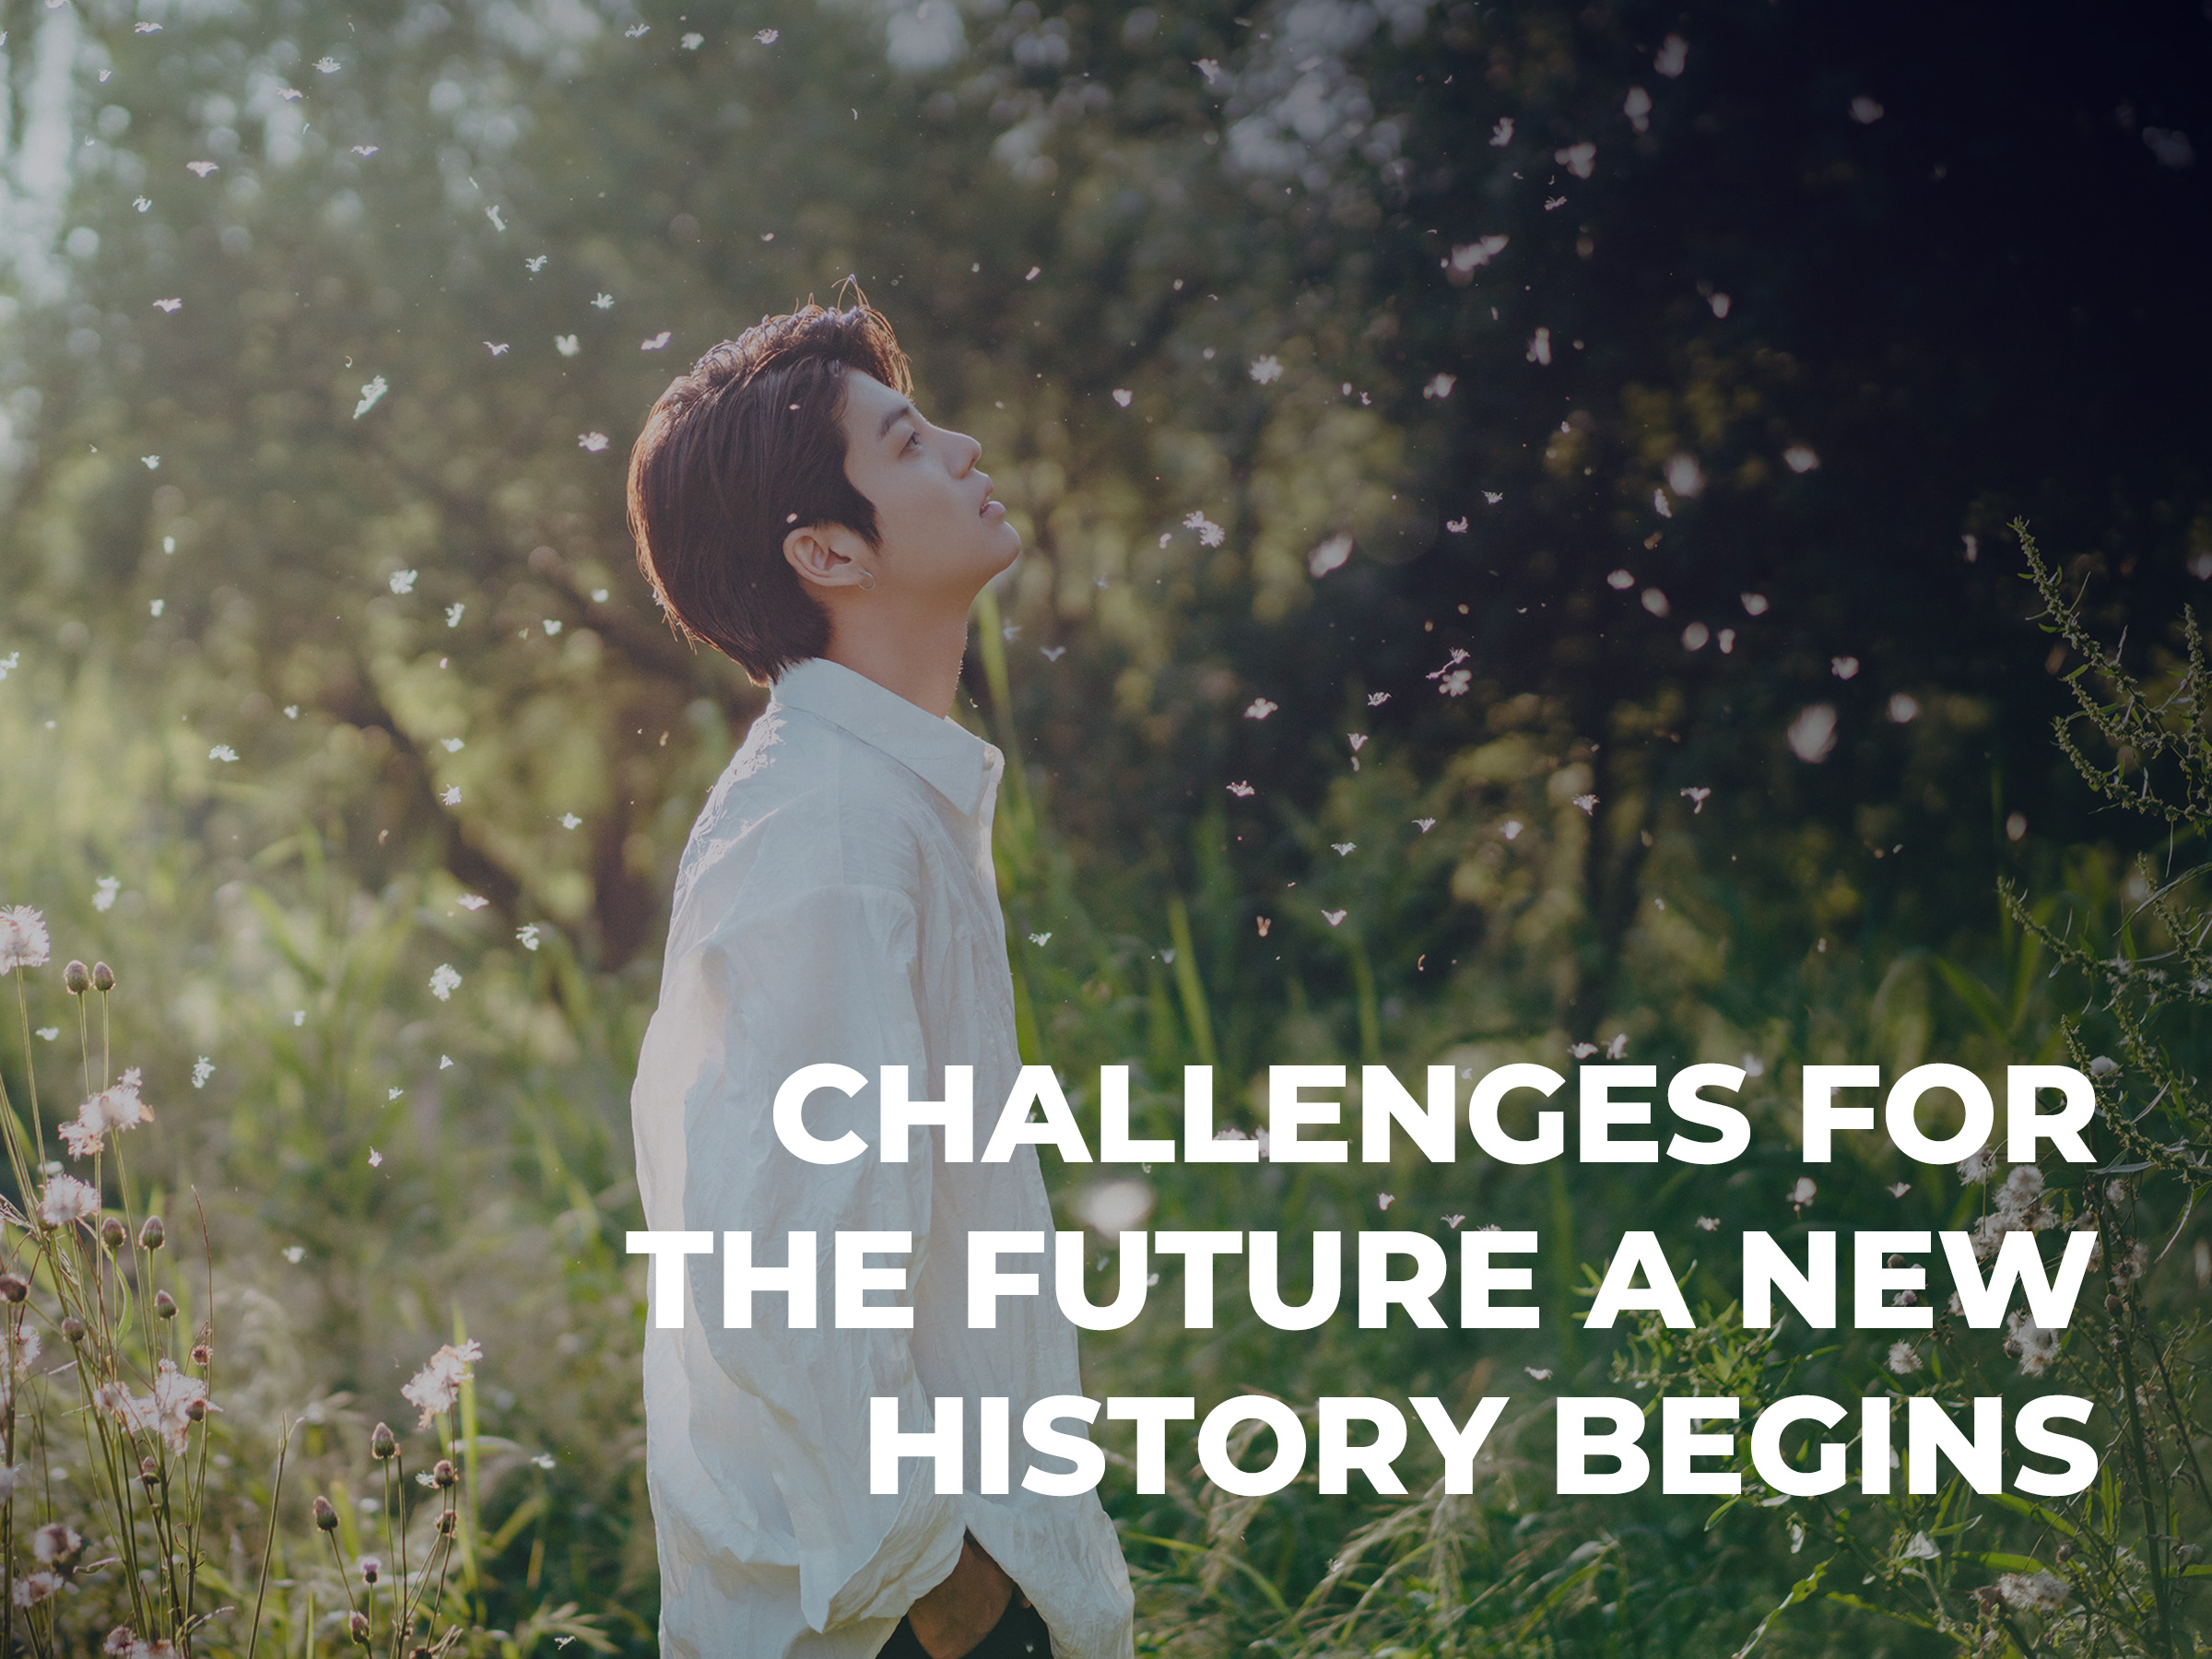 Challenges forthe future a new history begins